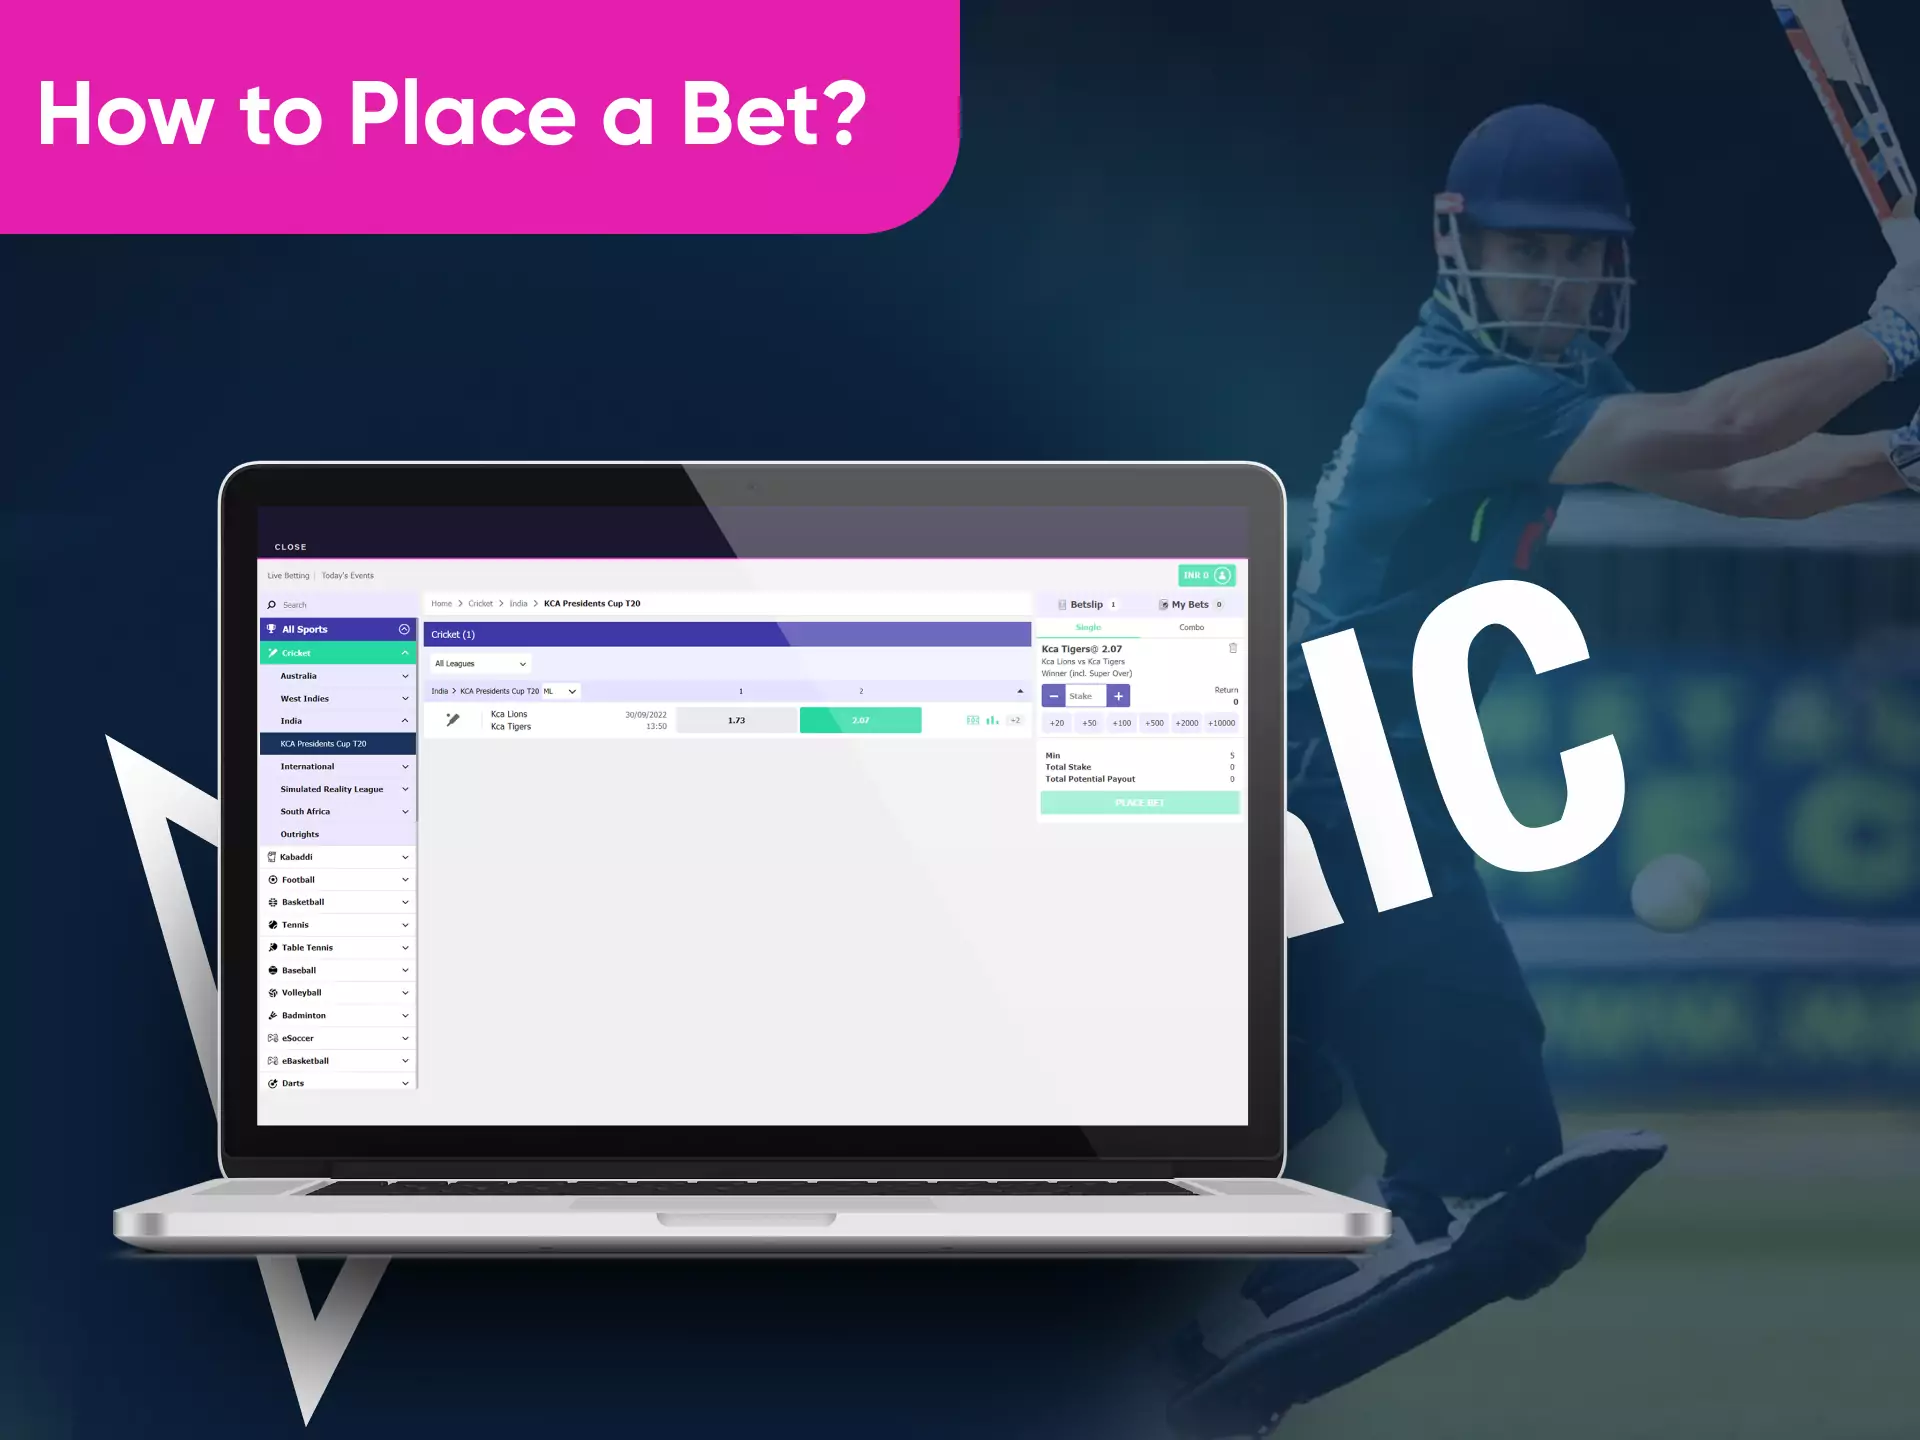 You can place bets on any available event on the Becric official website.